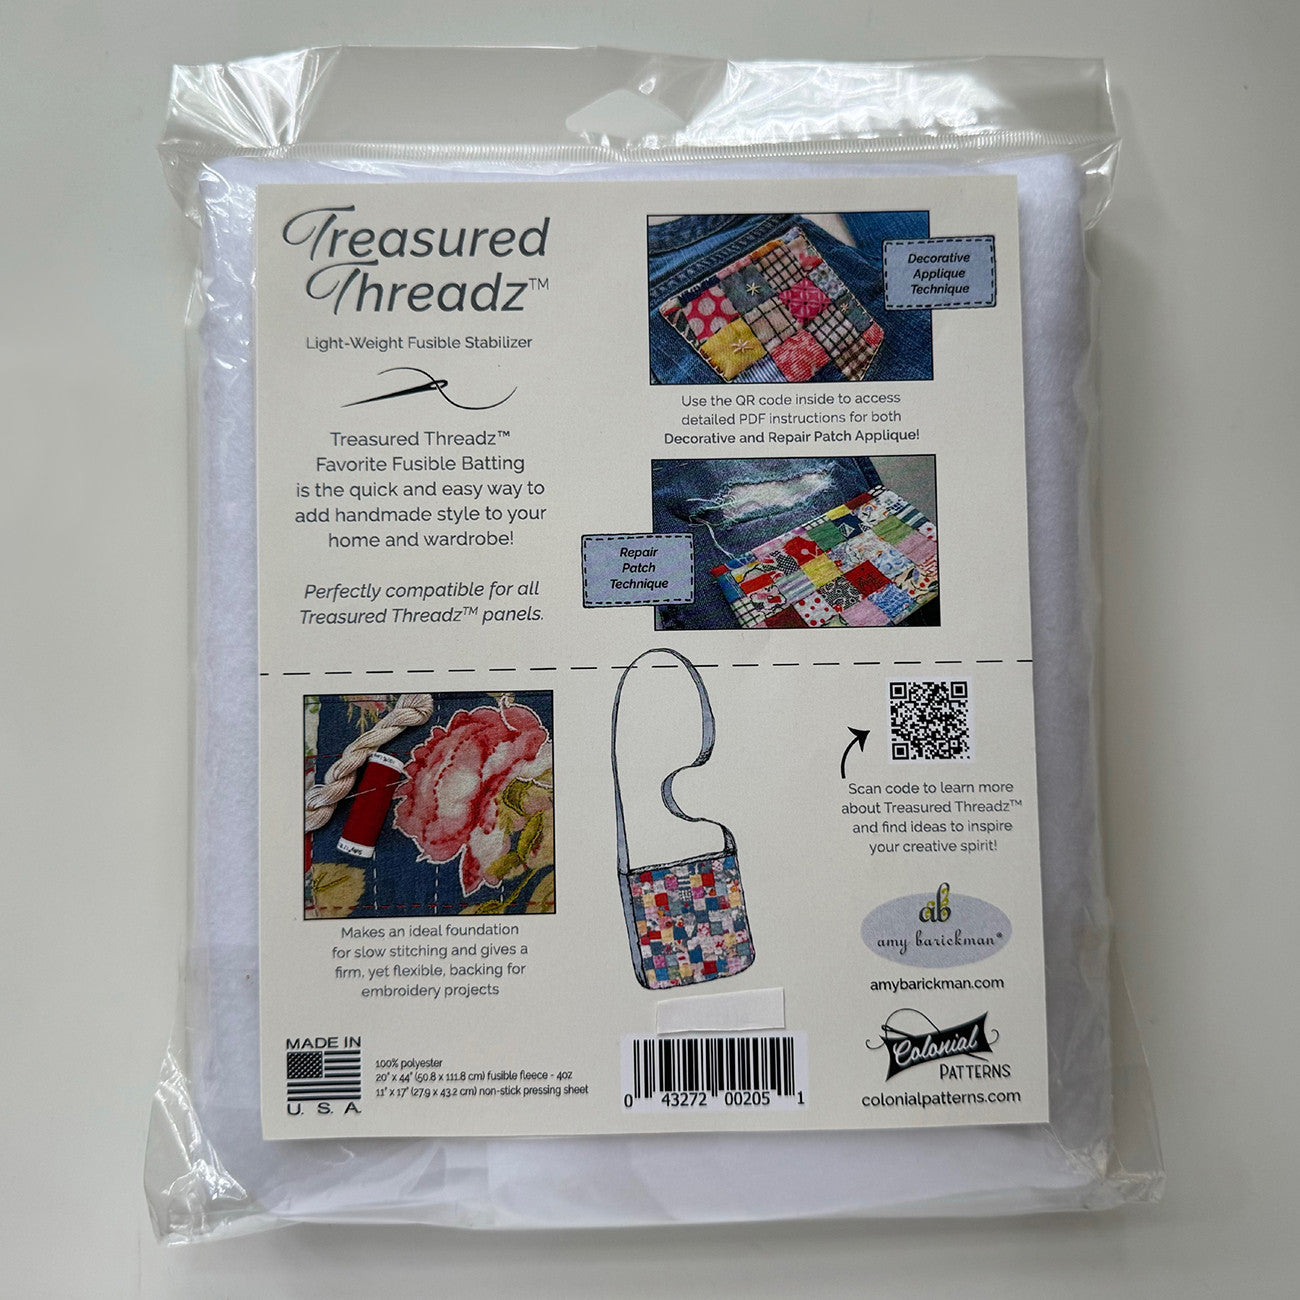 Light-Weight Fusible Stabilizer by Amy Barickman for Treasured Threadz